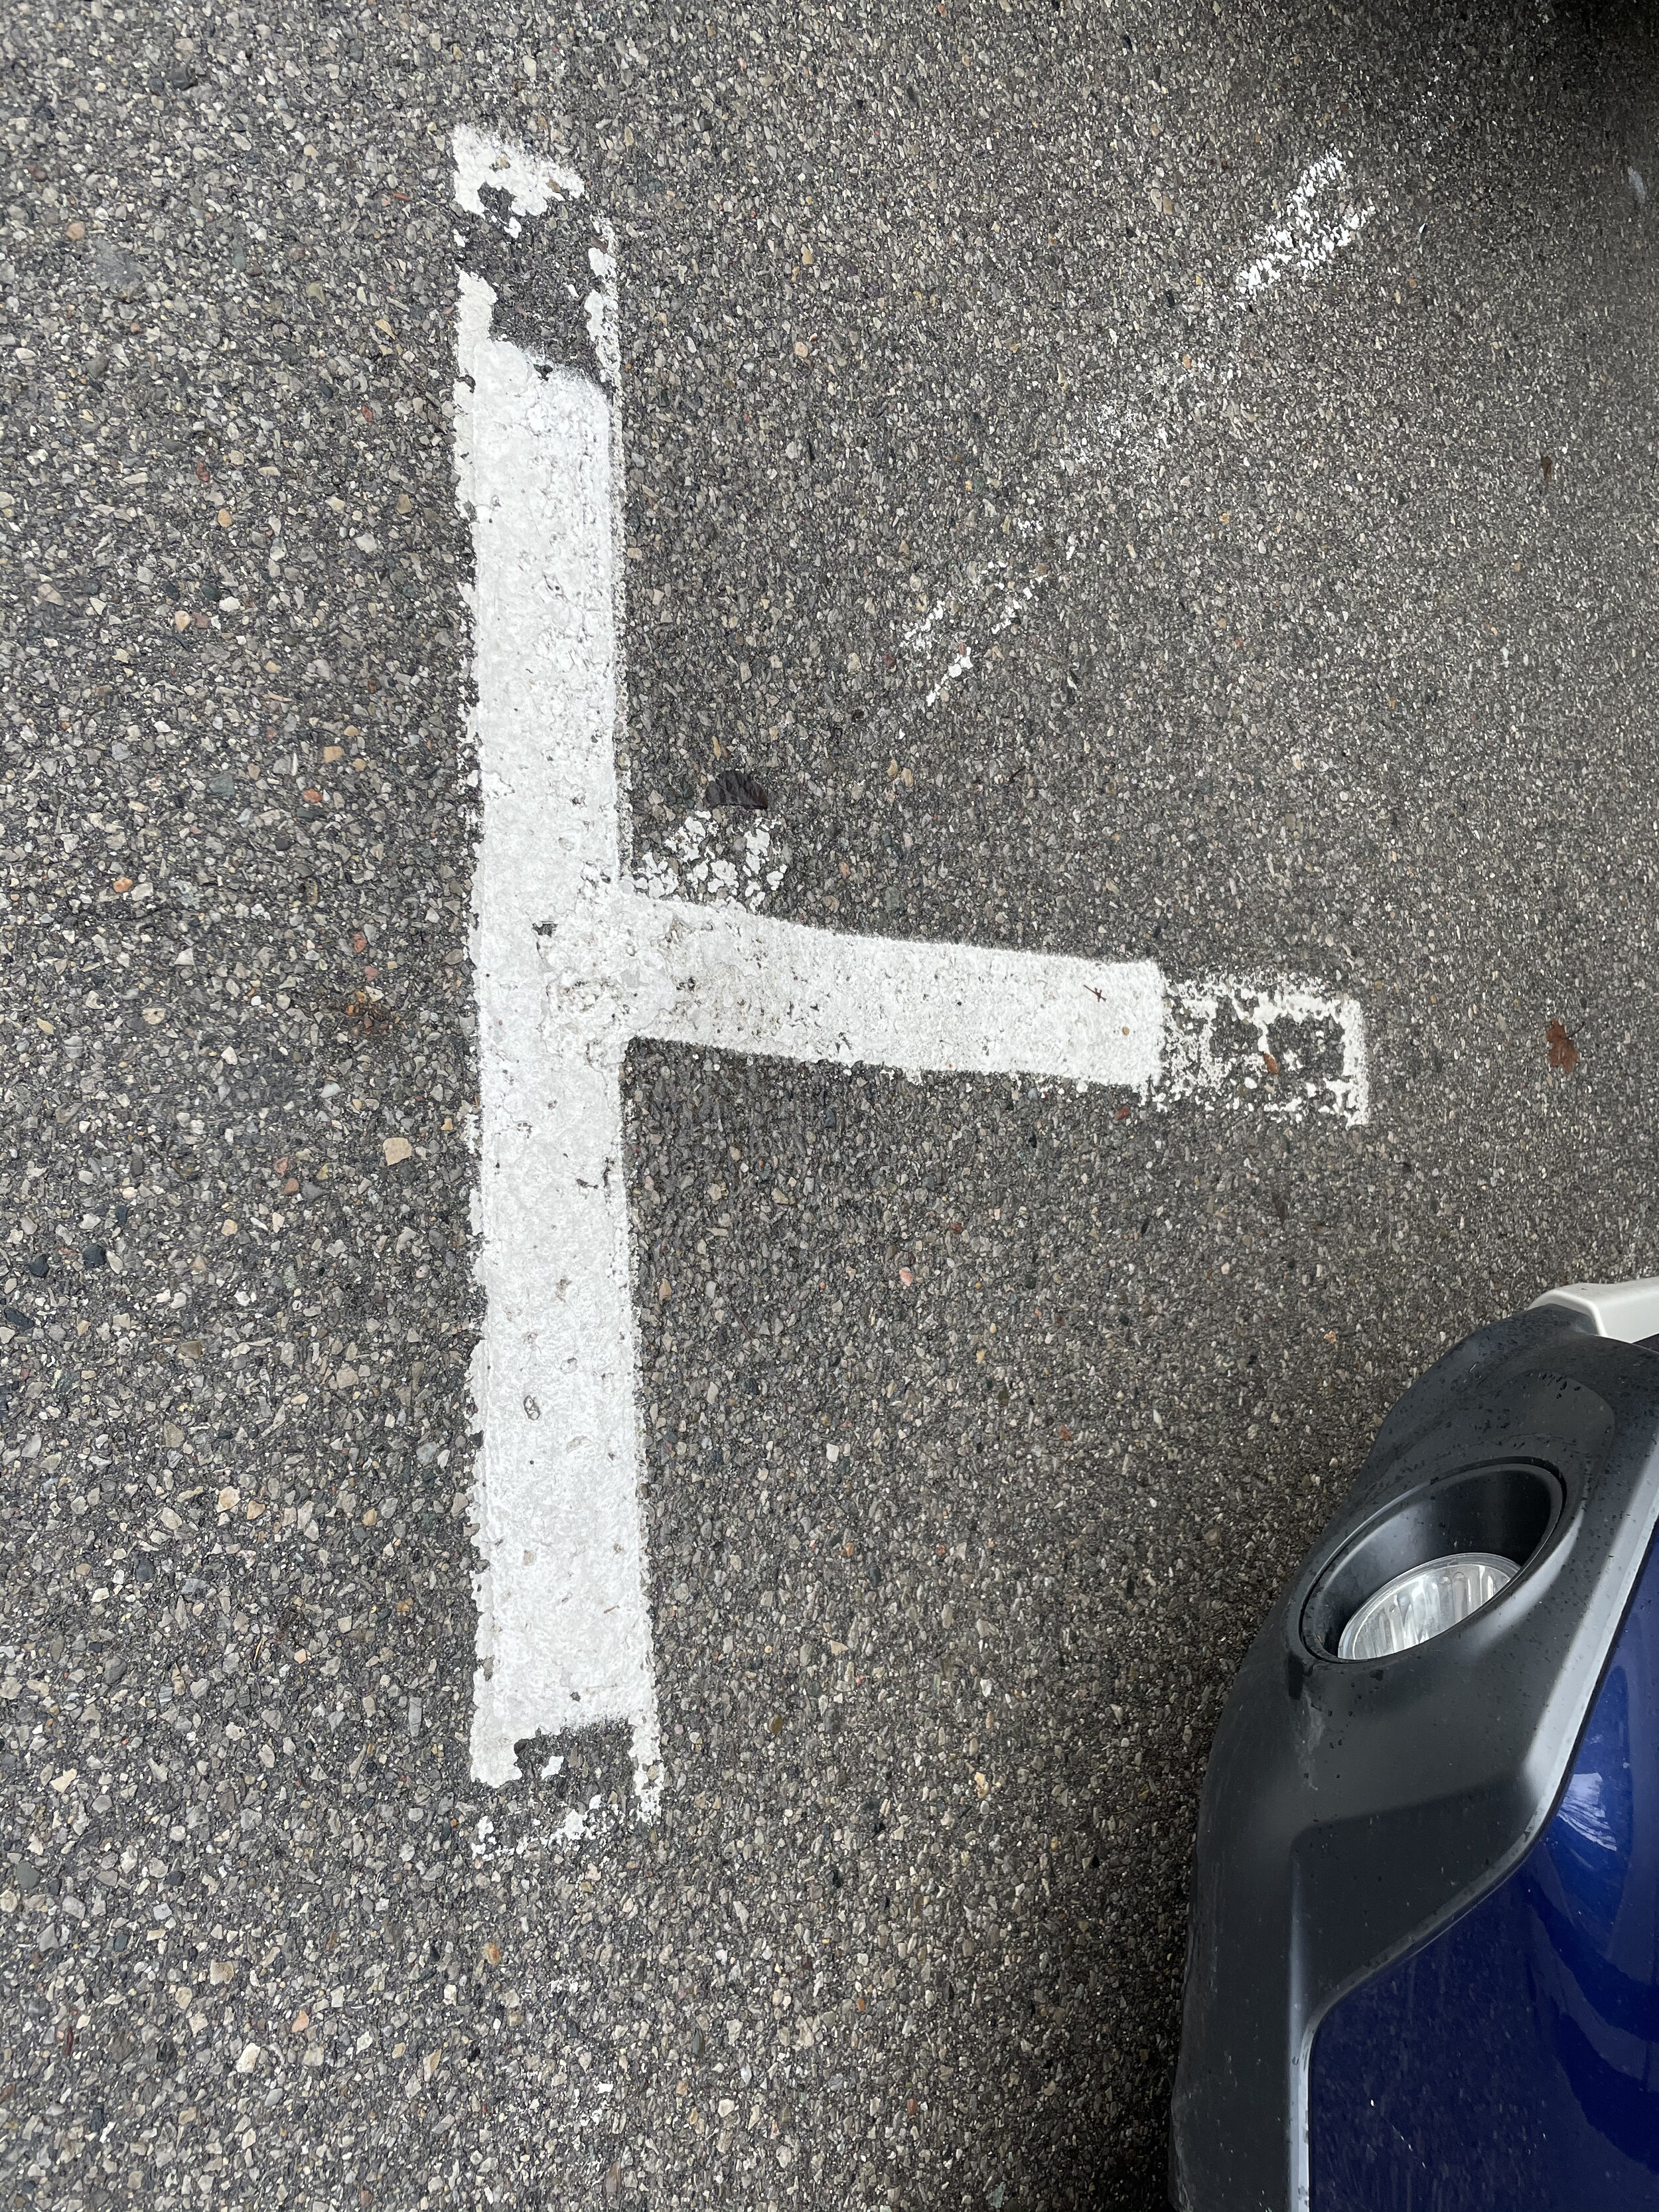 T-Stripes for Existing On-Street Parking